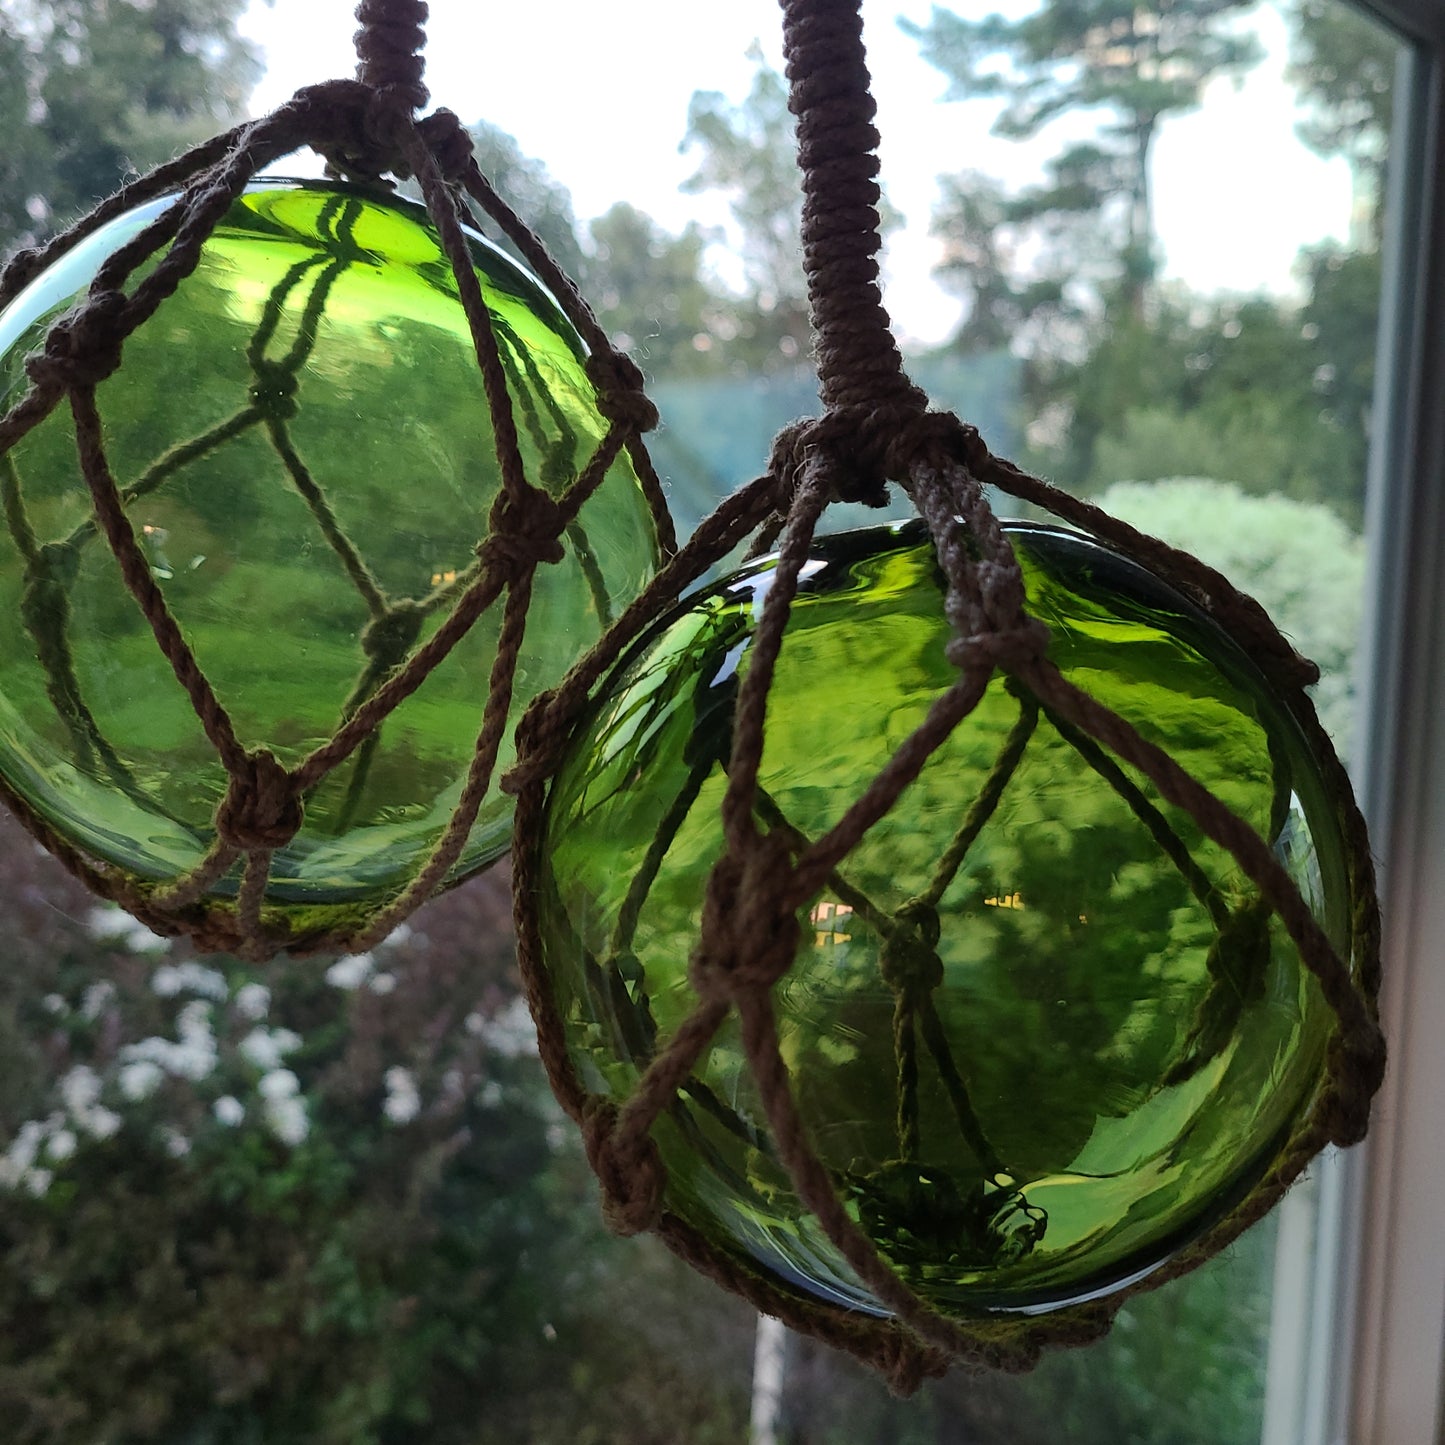 Blown Glass Float 5 inches with Jute Cord / Original Witch Ball